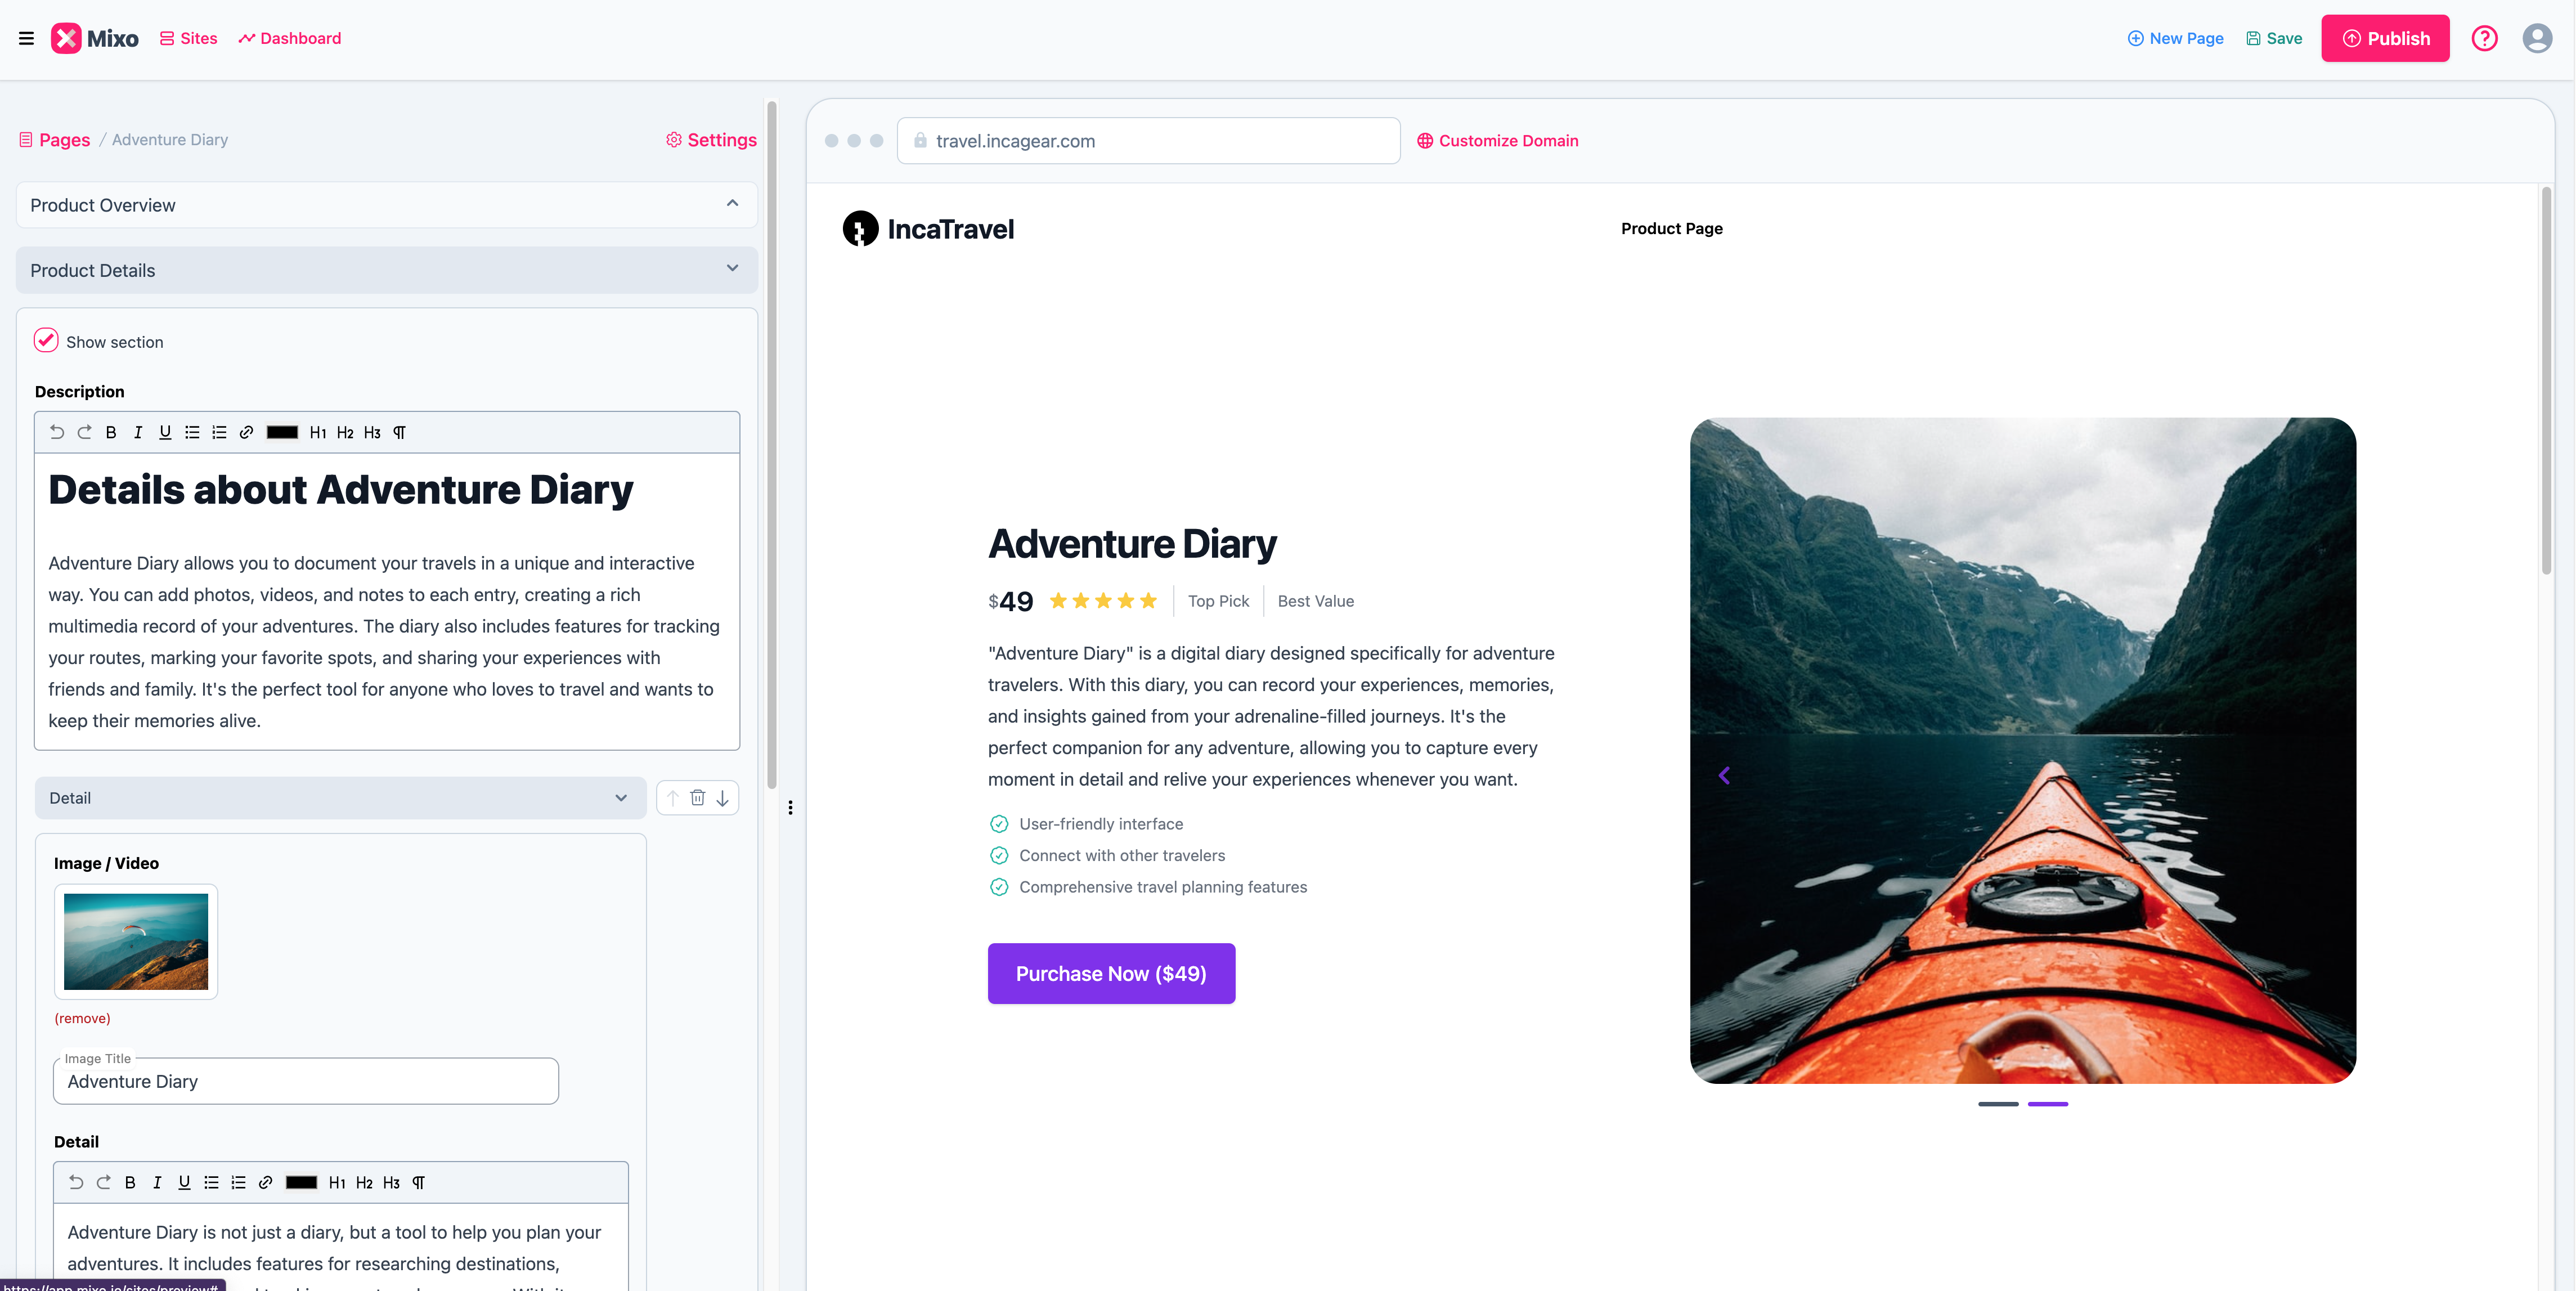 Different Page Templates: With Mixo, you can access various page templates like Home, Pricing, Service, Product, etc., all tailored for optimal user experience.